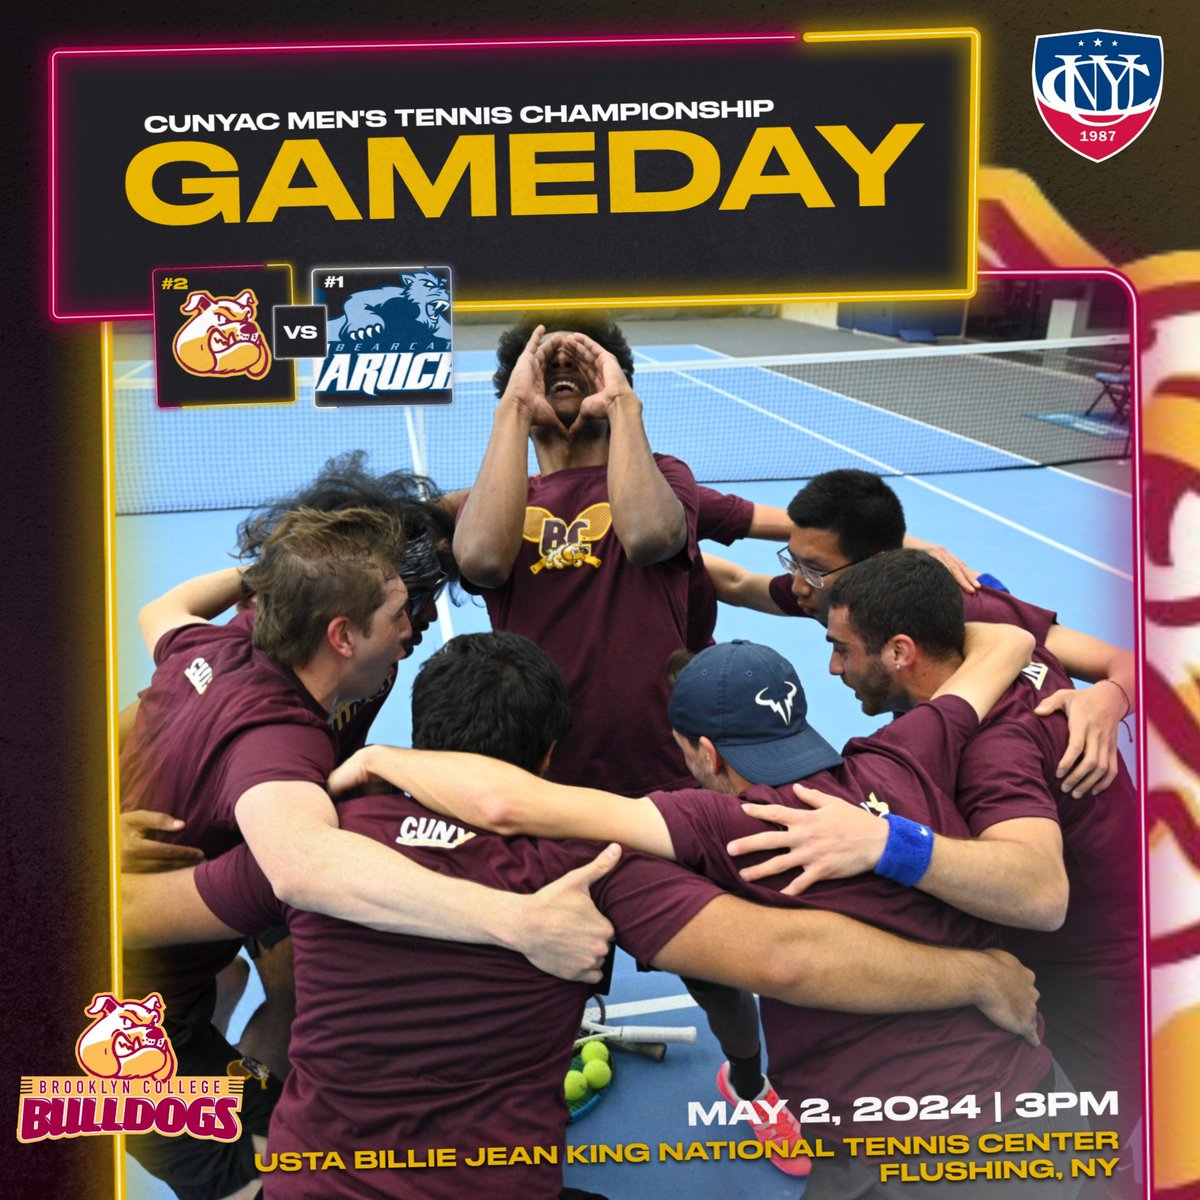 🏆 CHAMPIONSHIP🏆

Calling all @bklyncollege411 Bulldogs to come out and support #BCmt in their first @cunyac Championship since 2007! 🐶🎾

🆚 @baruchathletics
⌚3pm
🏟️ USTA National Tennis Center 
📍Flushing, NY 
🎟️FREE ADMISSION 

#PlayLikeaBulldog #cunychamps #d3tennis #ita